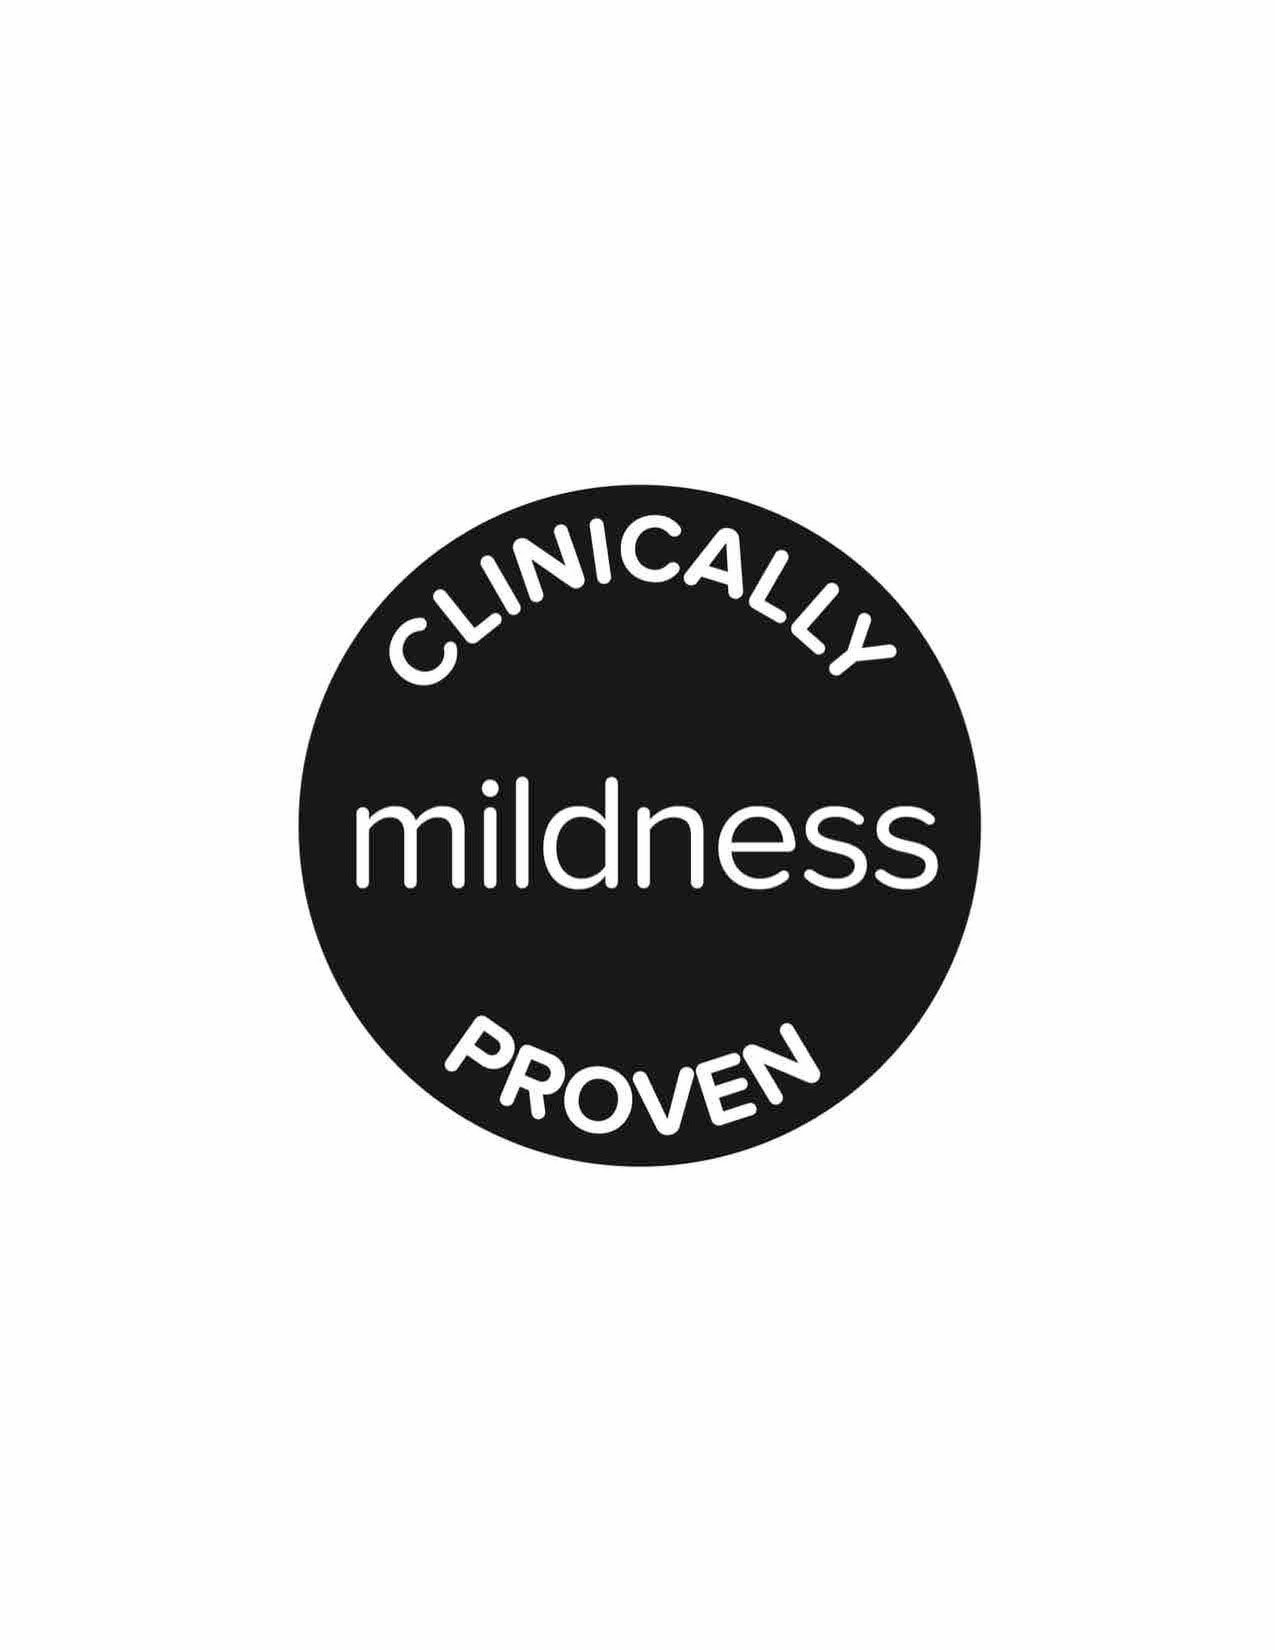  CLINICALLY PROVEN MILDNESS